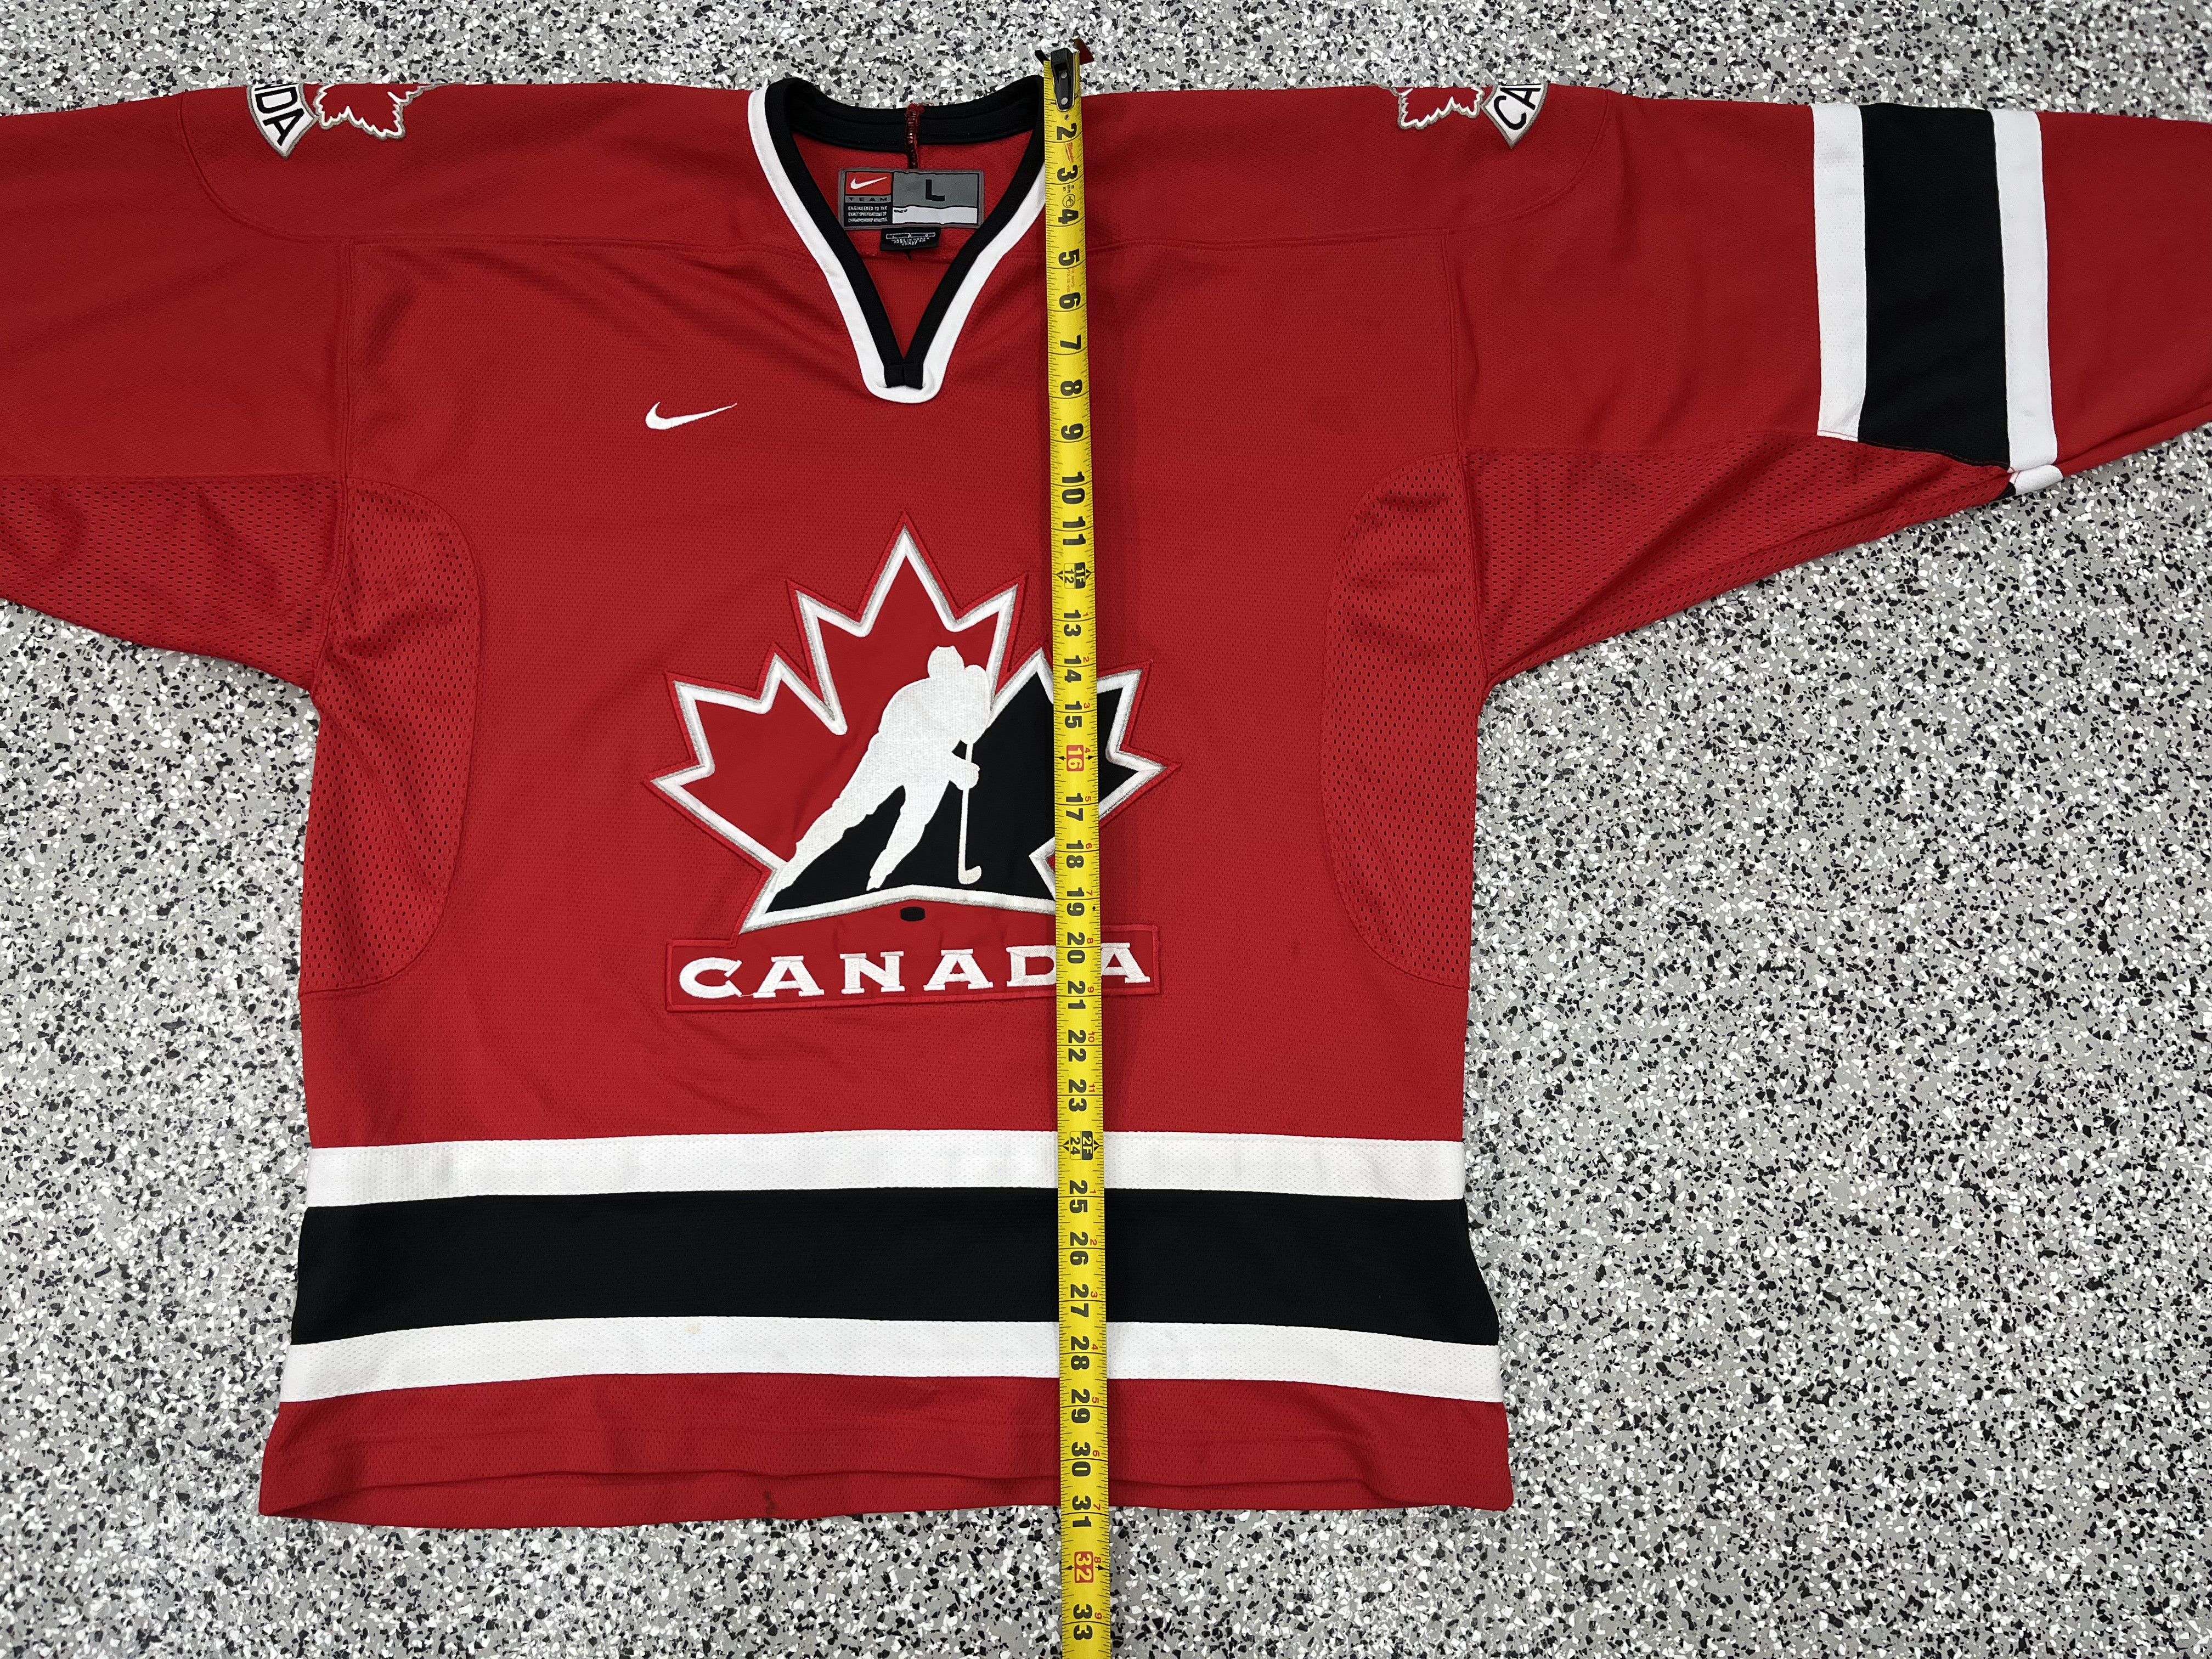 2002-06 CANADA NATIONAL HOCKEY TEAM NIKE JERSEY (HOME) L - Classic